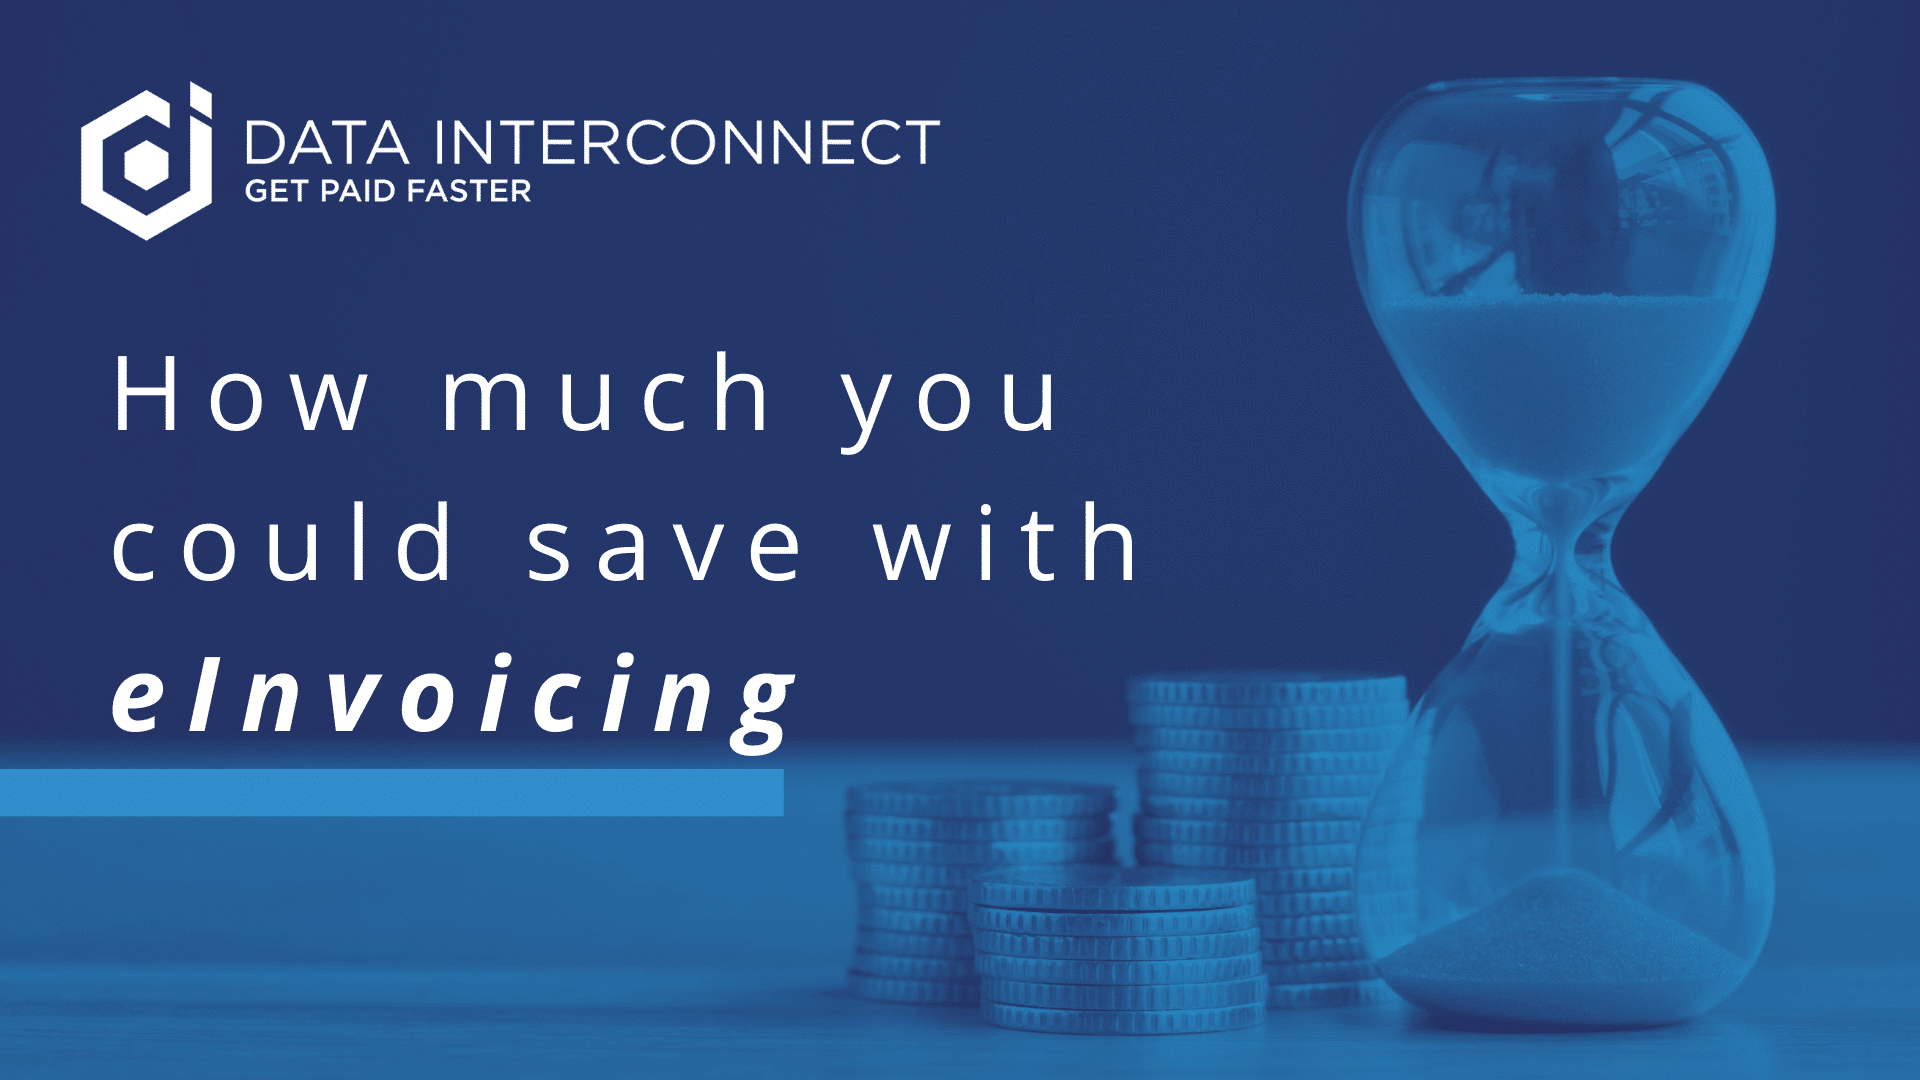 Data Interconnect - Save with eInvoicing